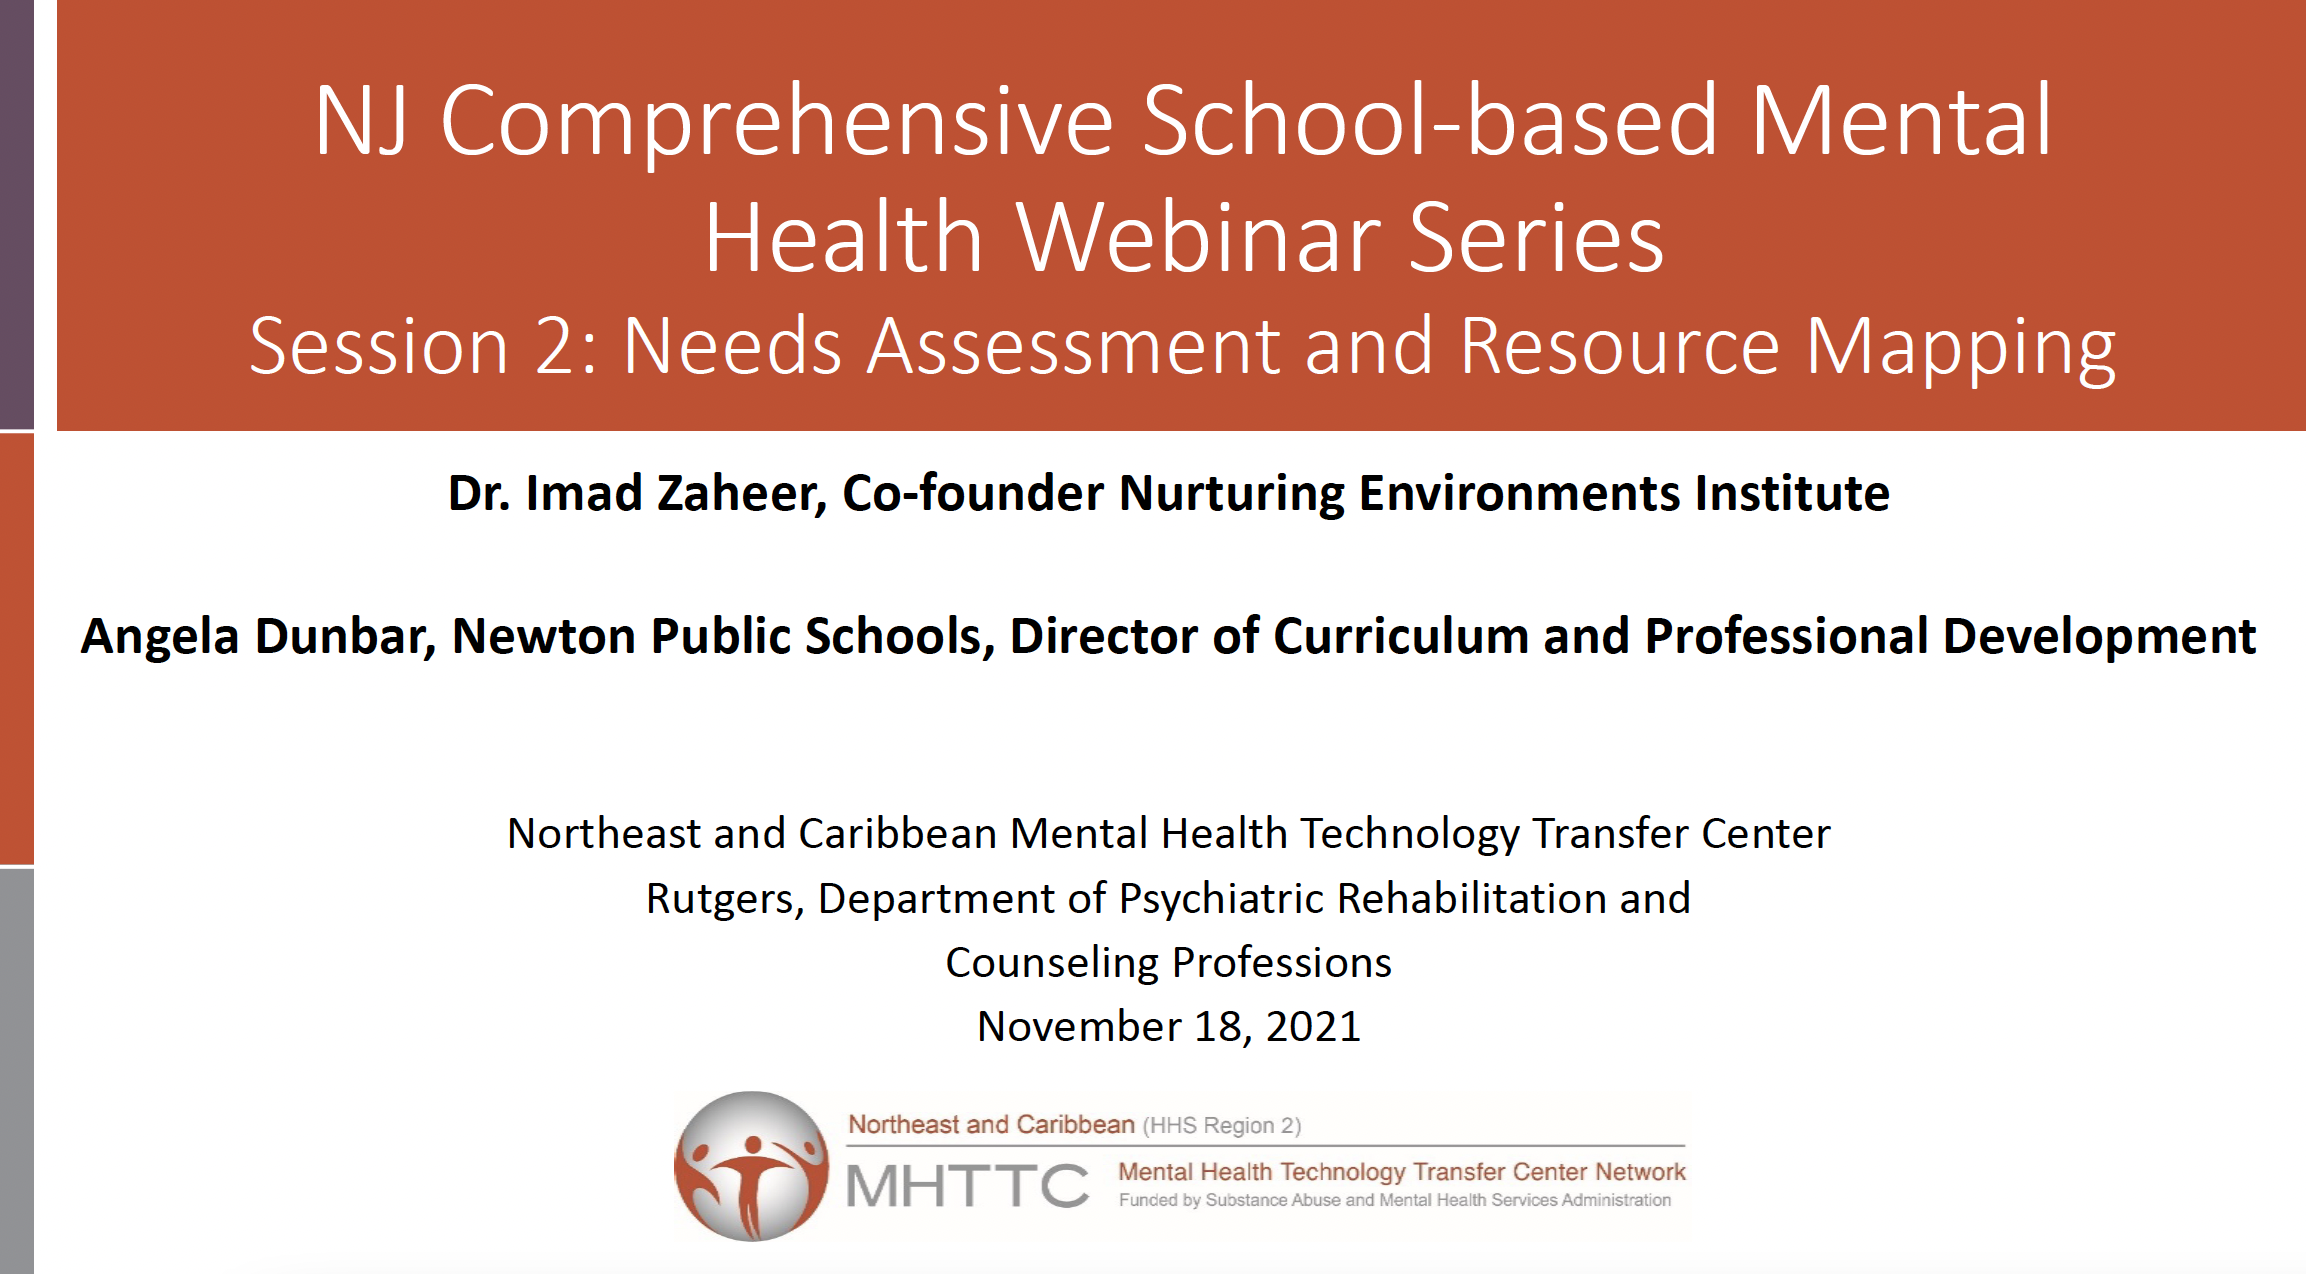 NJ Comprehensive School-Based Mental Health Webinar Series | Session 2: Needs Assessment and Resource Mapping